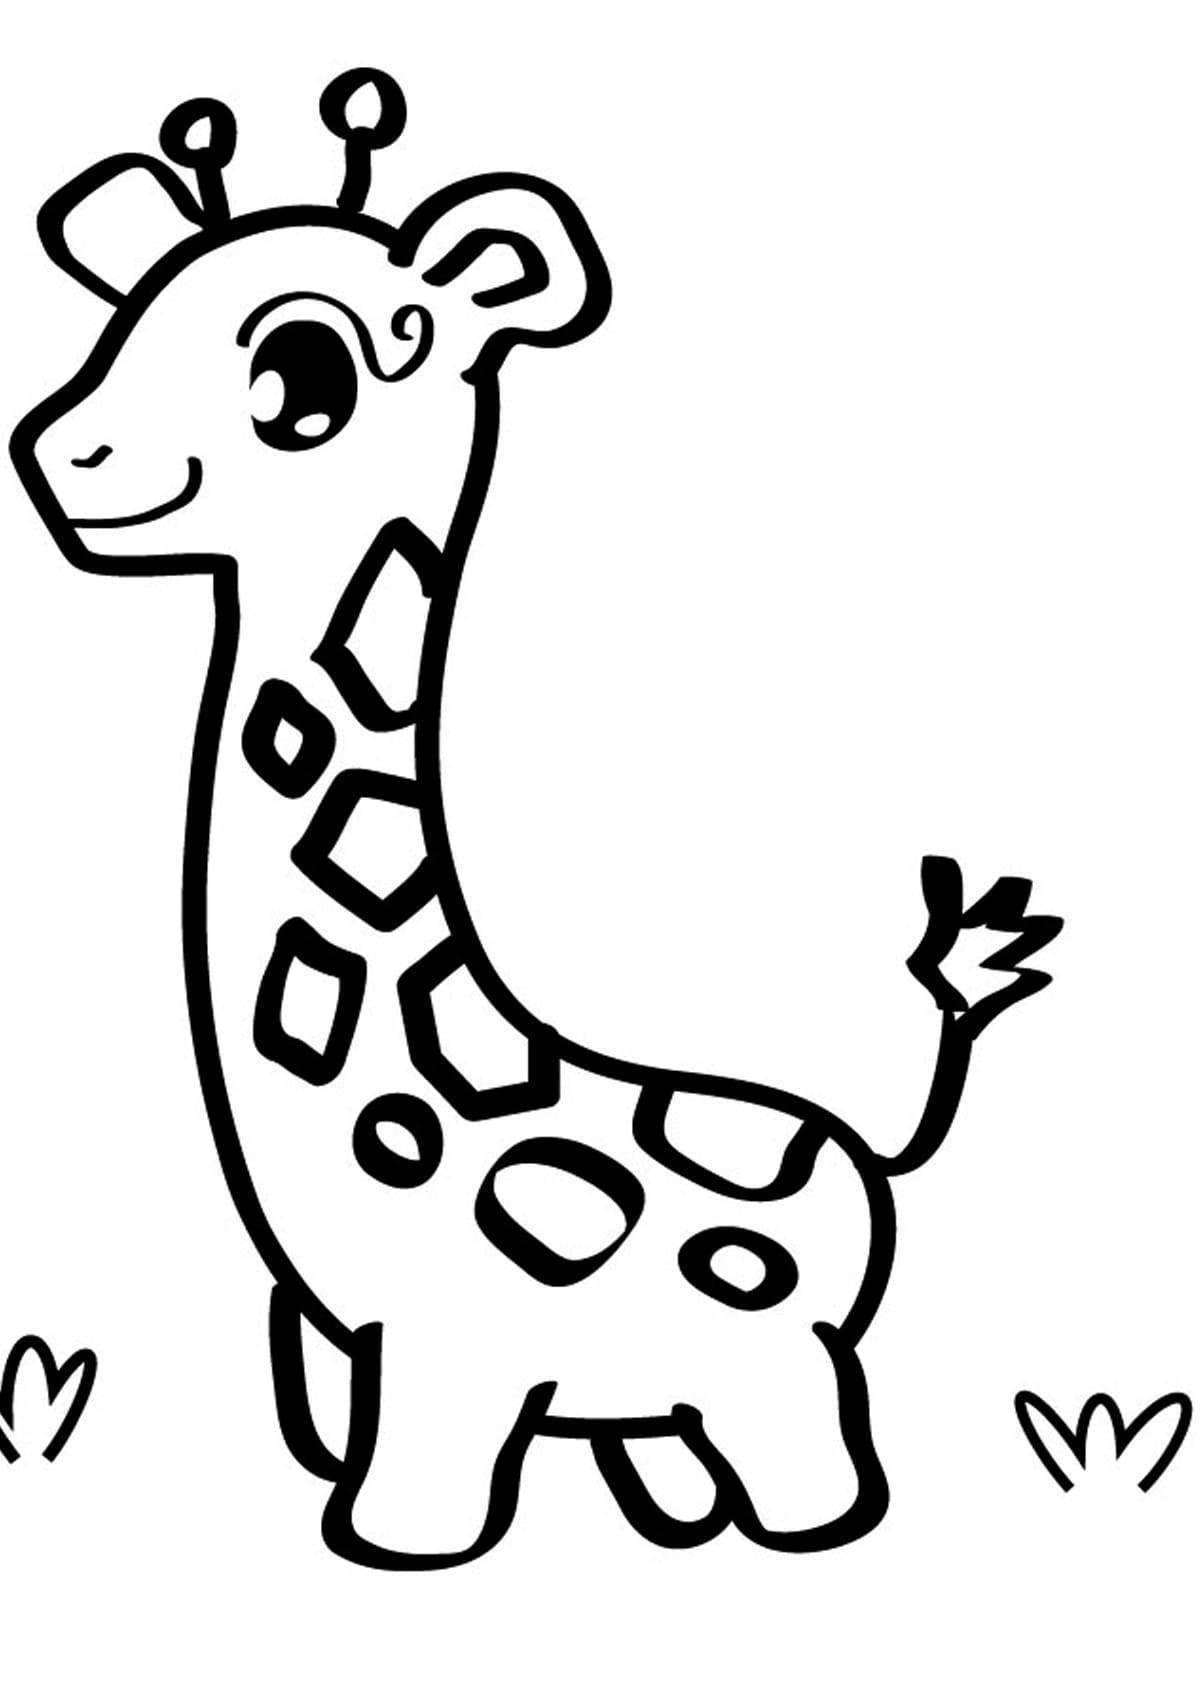 Fabulous coloring giraffe for children 3-4 years old